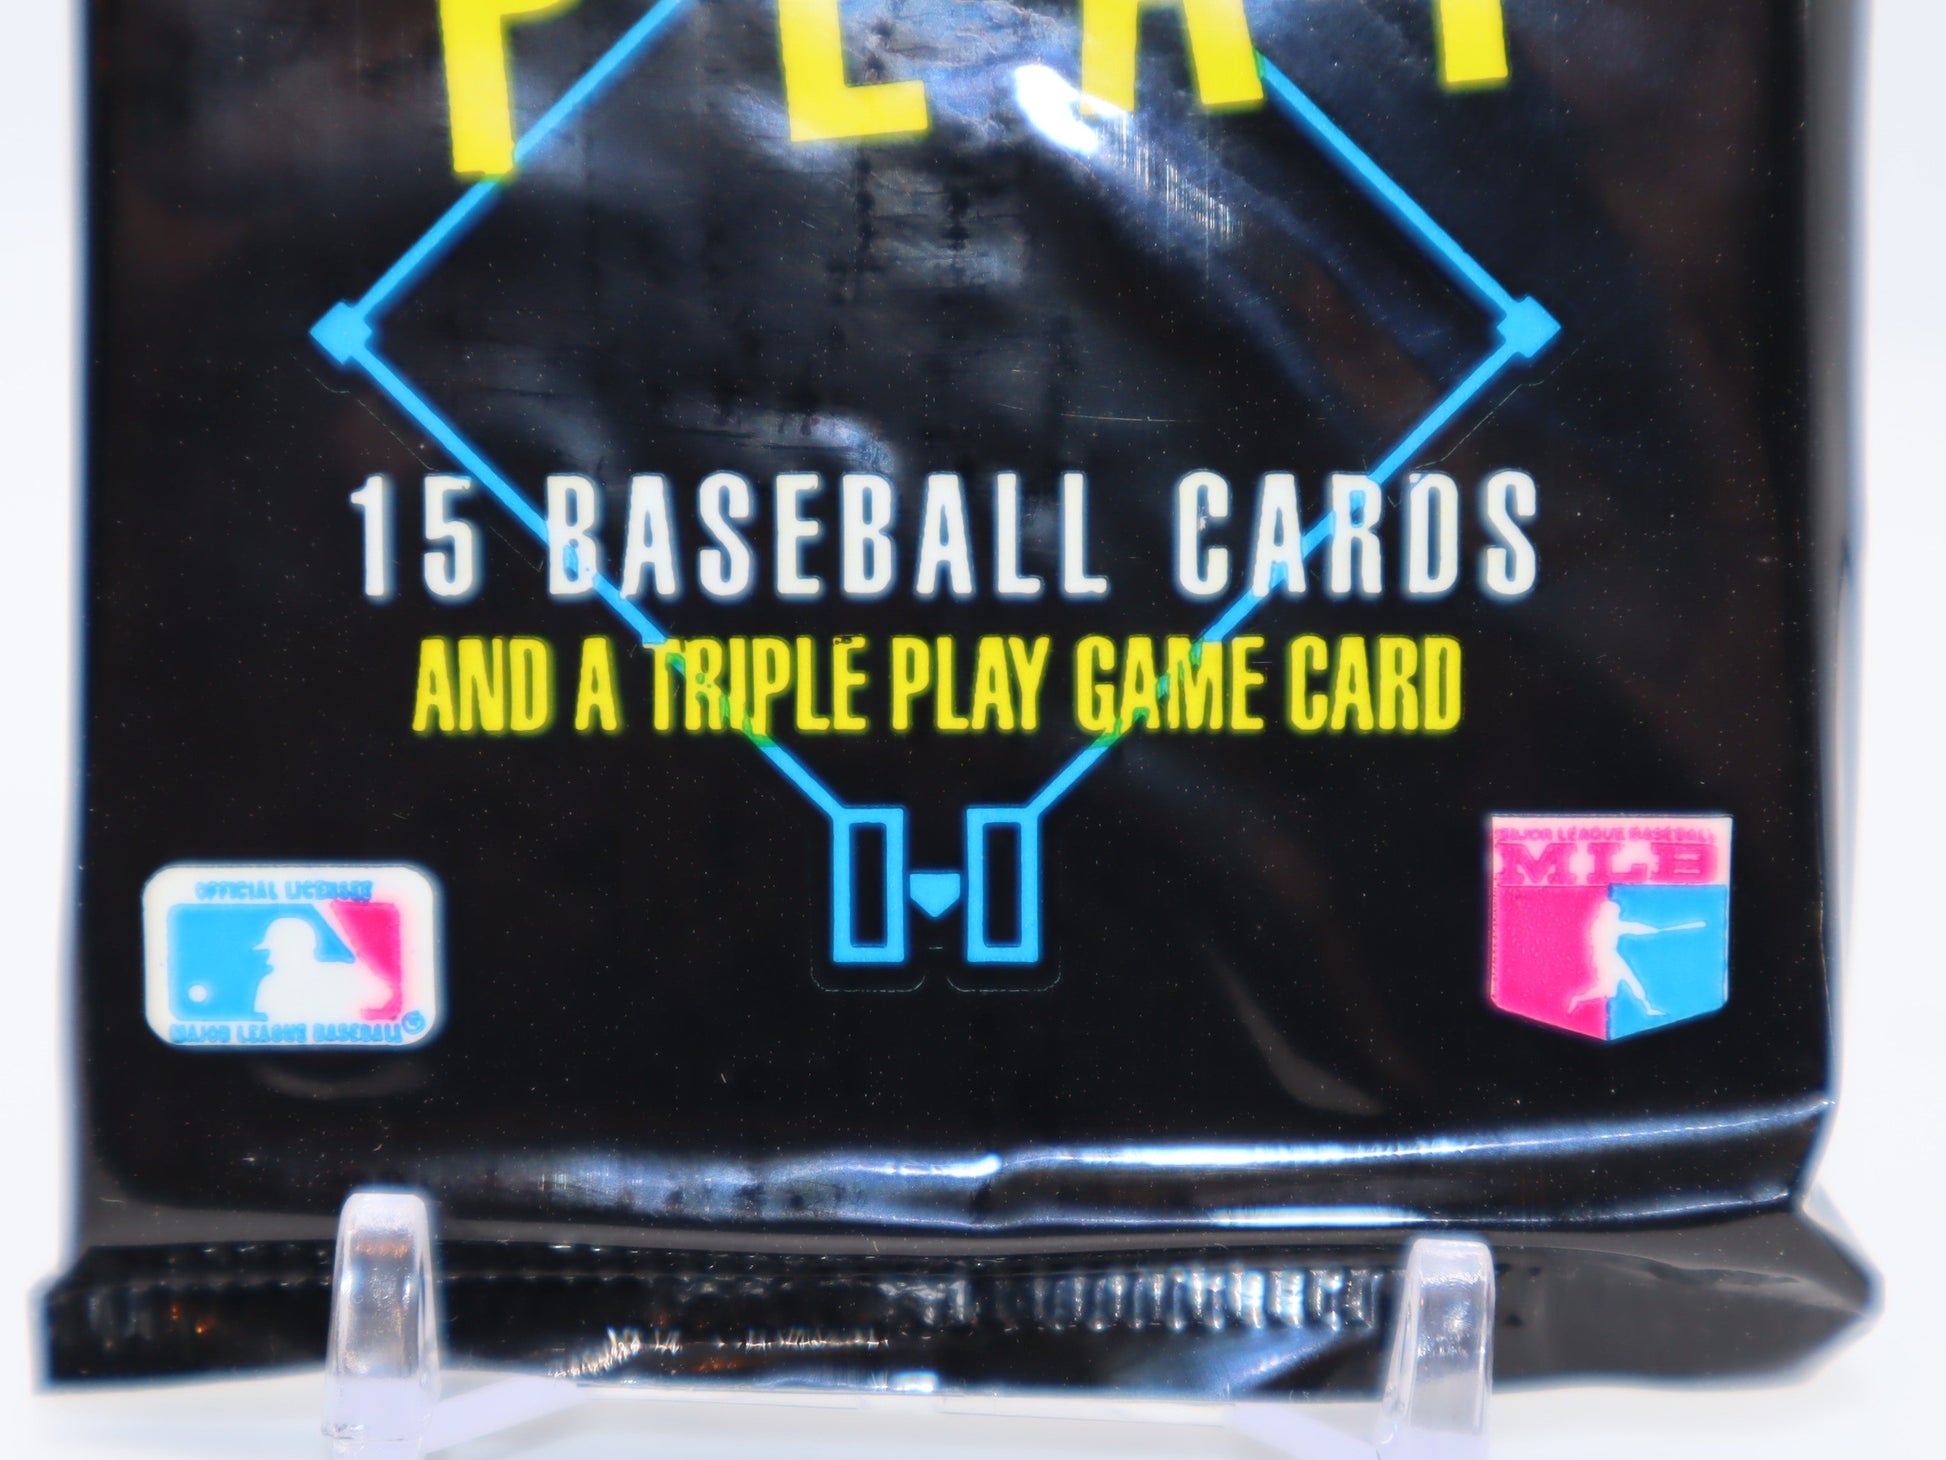 1992 Donruss Triple Play Baseball Cards Wax Pack - Collectibles